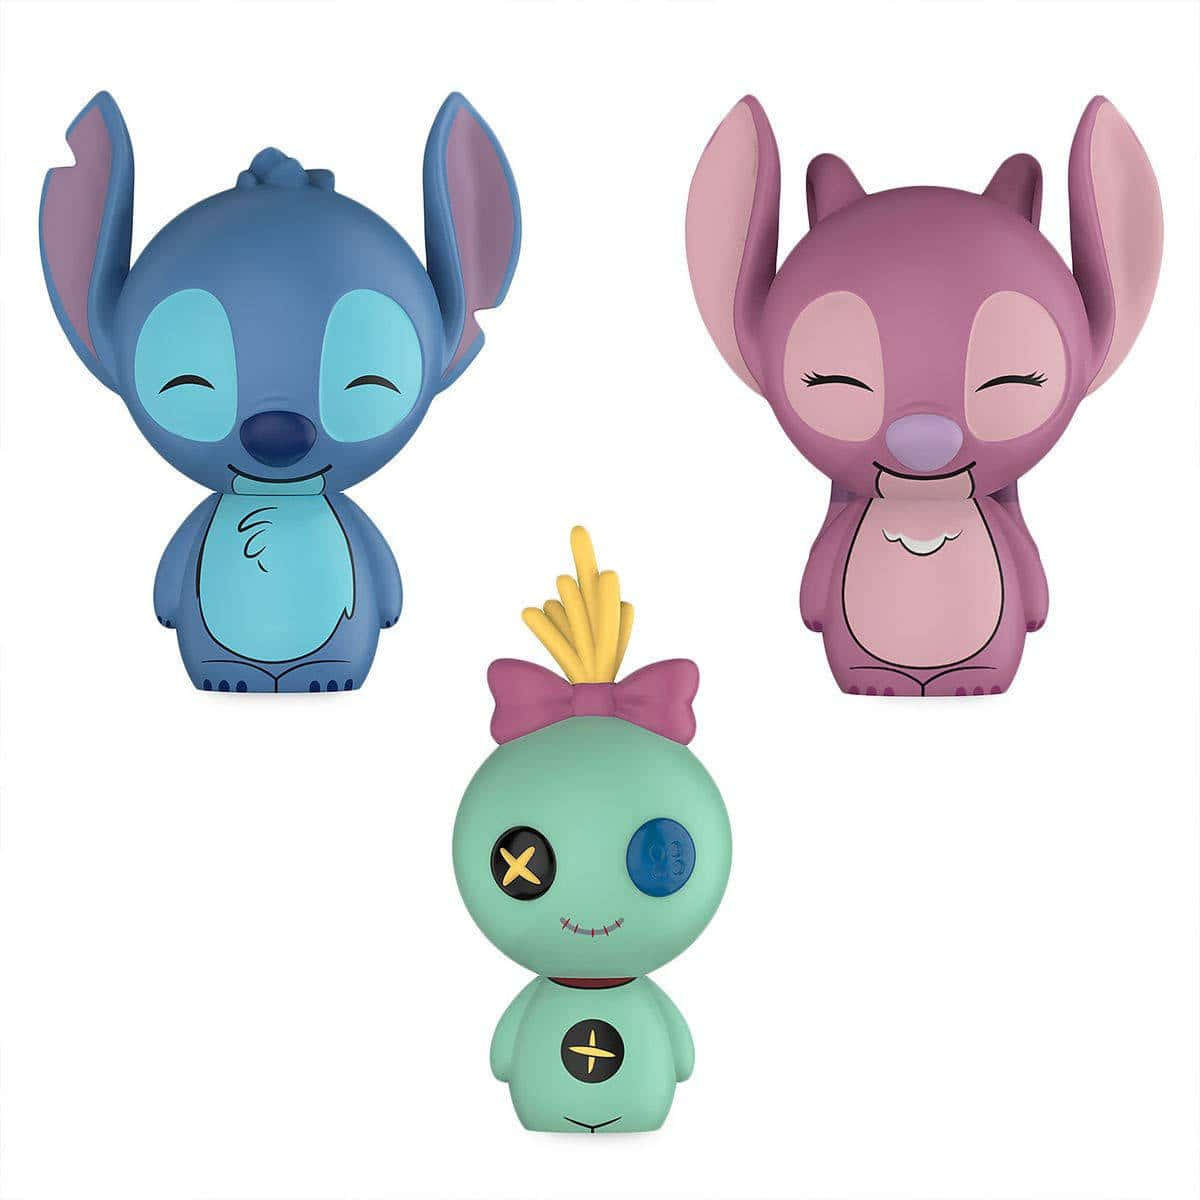 Cute Stitch And Angel Disney Action Figures Wallpaper